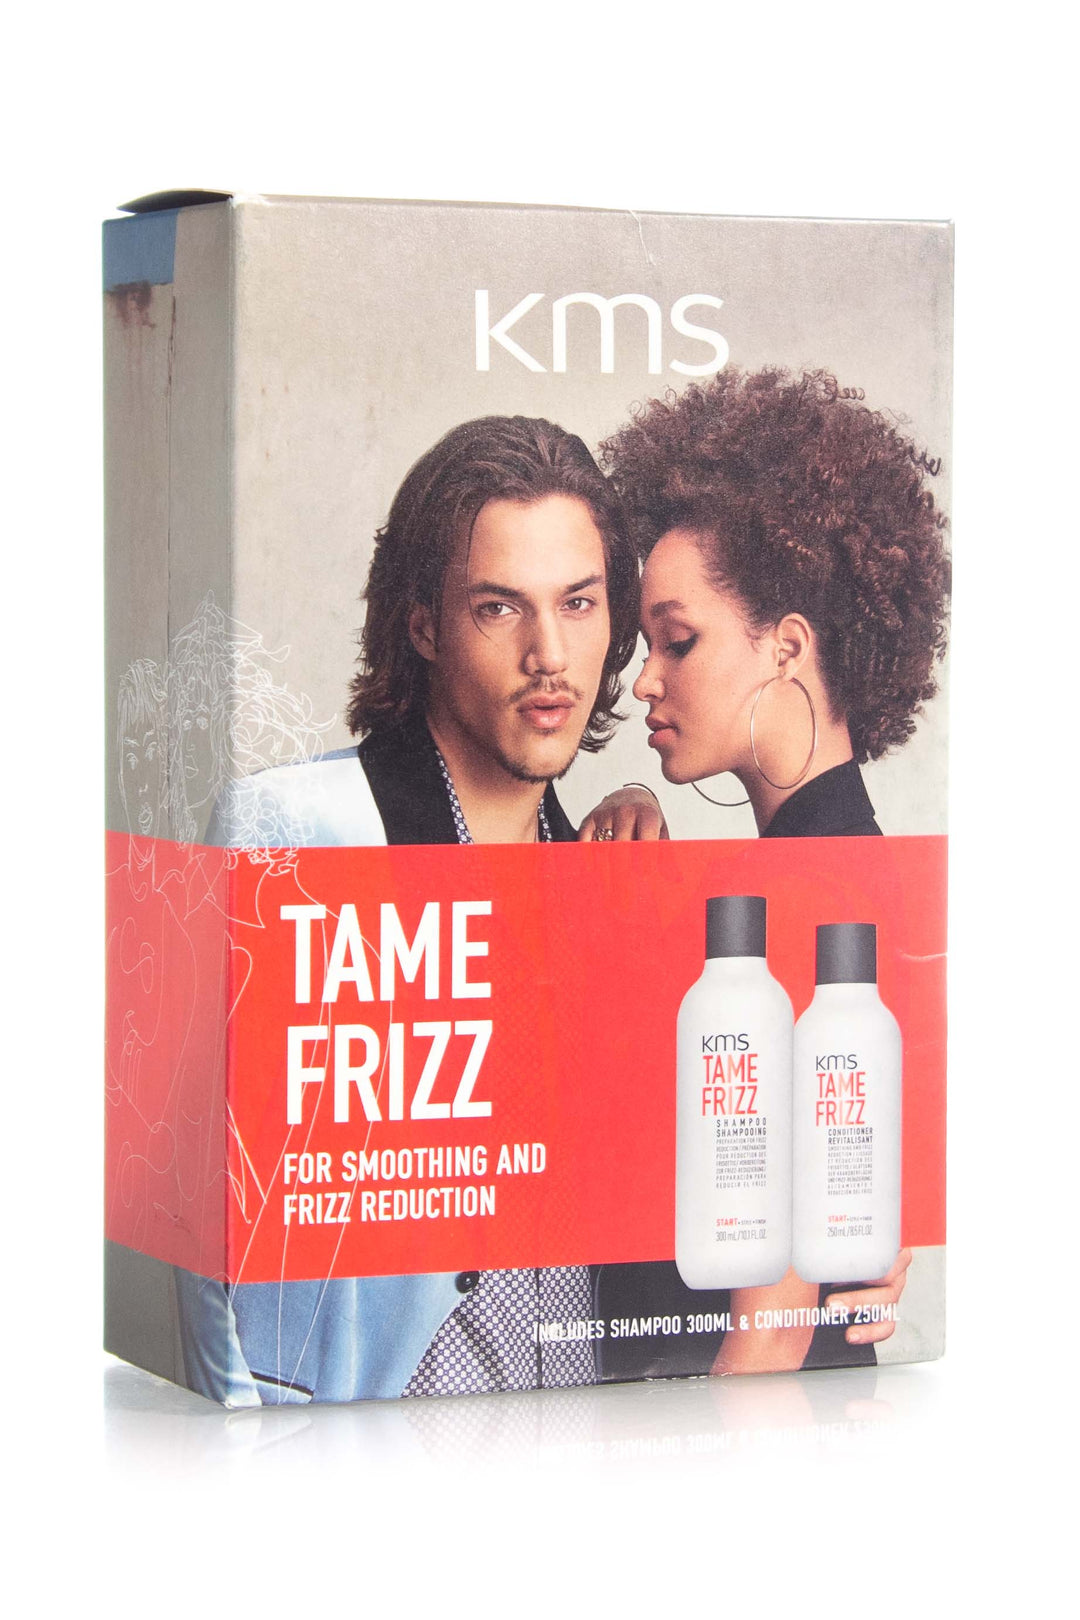 KMS Tame Frizz Duo Pack